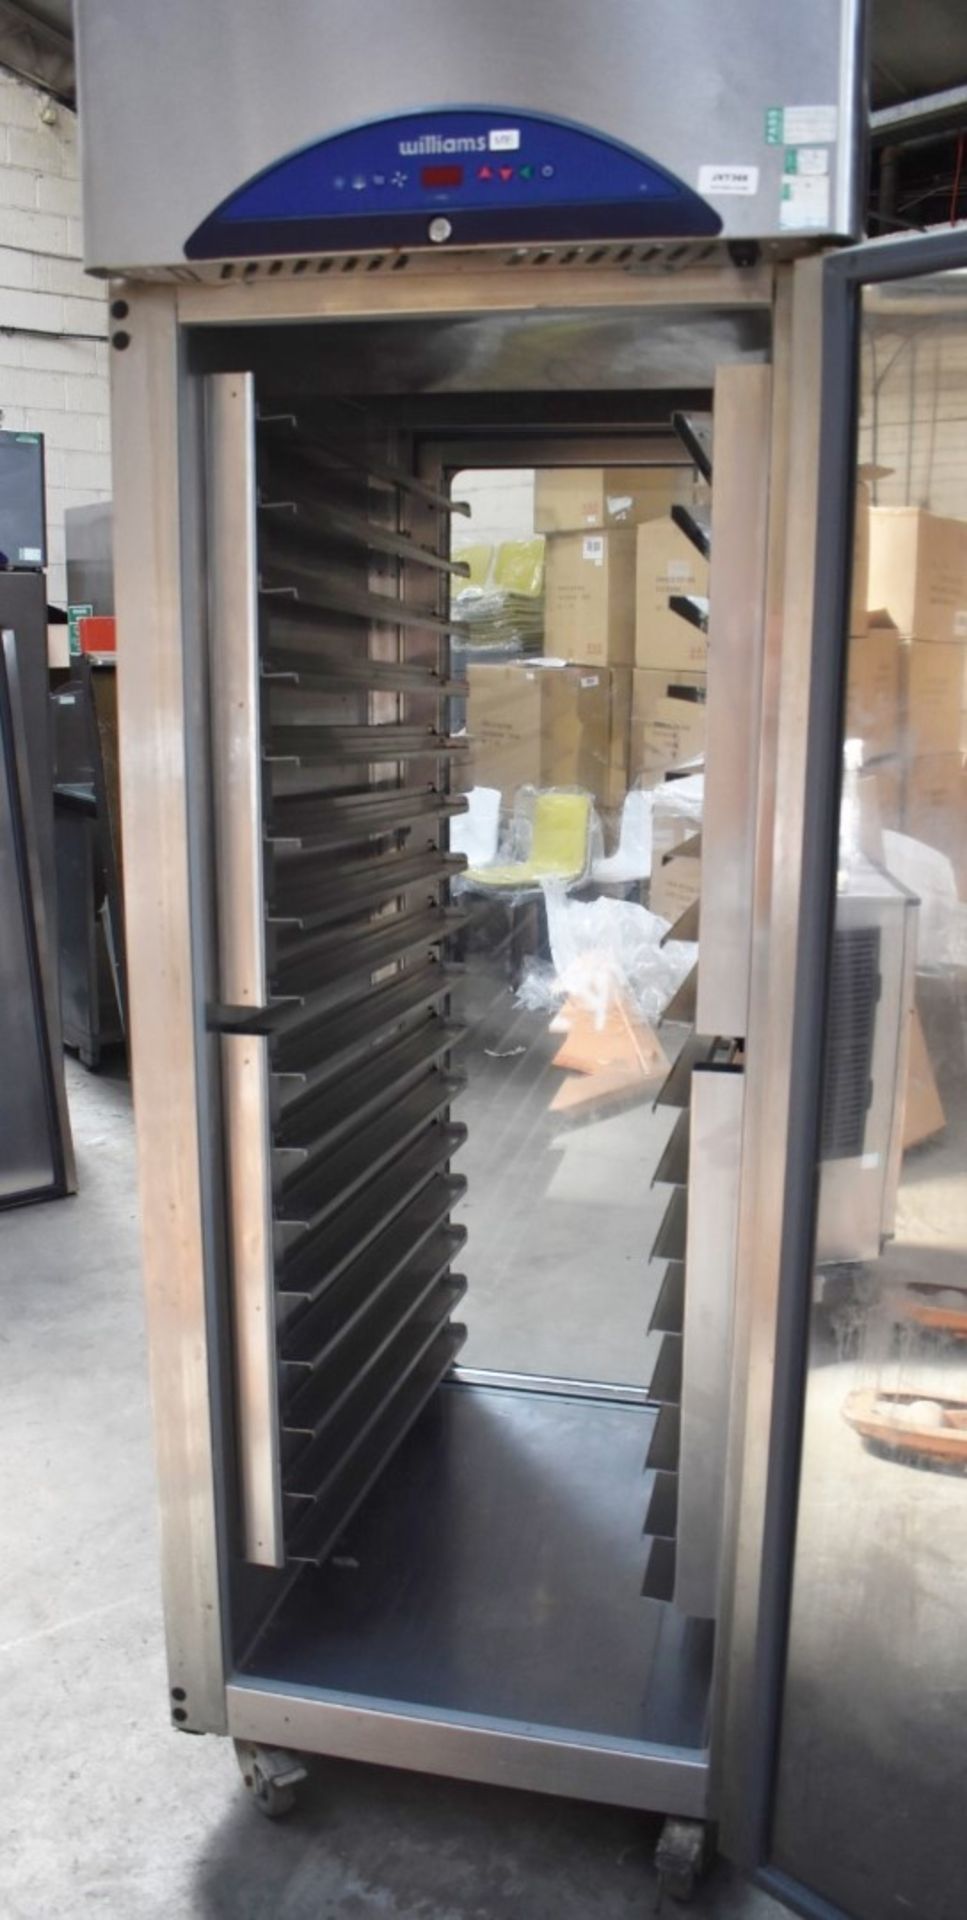 1 x Williams Upright Bakery Refrigerator With Two Side Access - Features Two Doors For Passthrough - Image 6 of 9